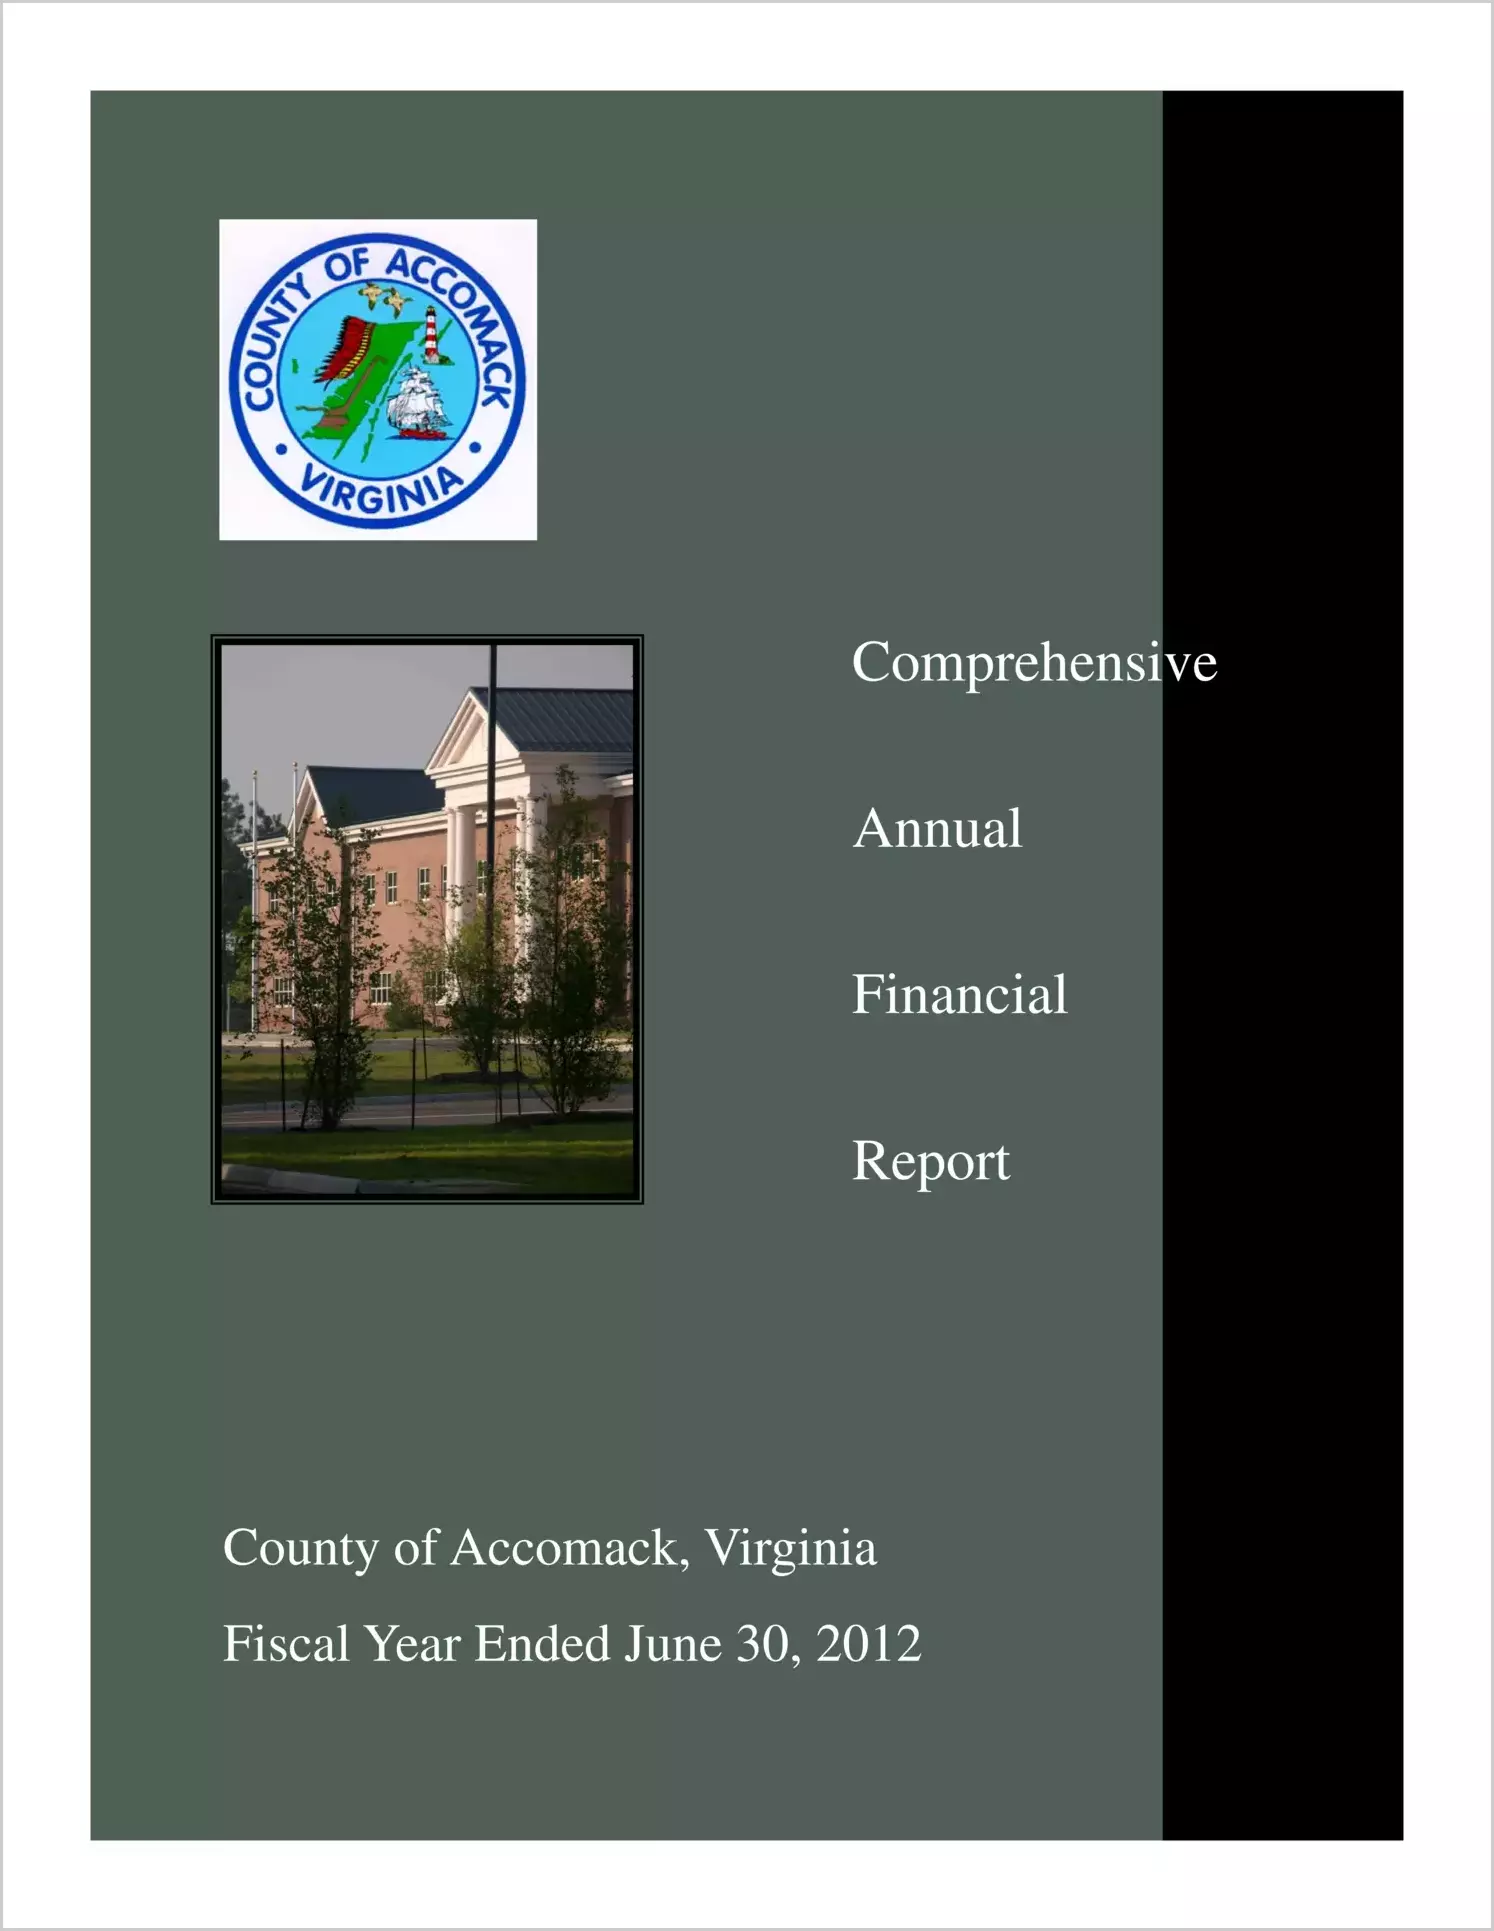 2012 Annual Financial Report for County of Accomack